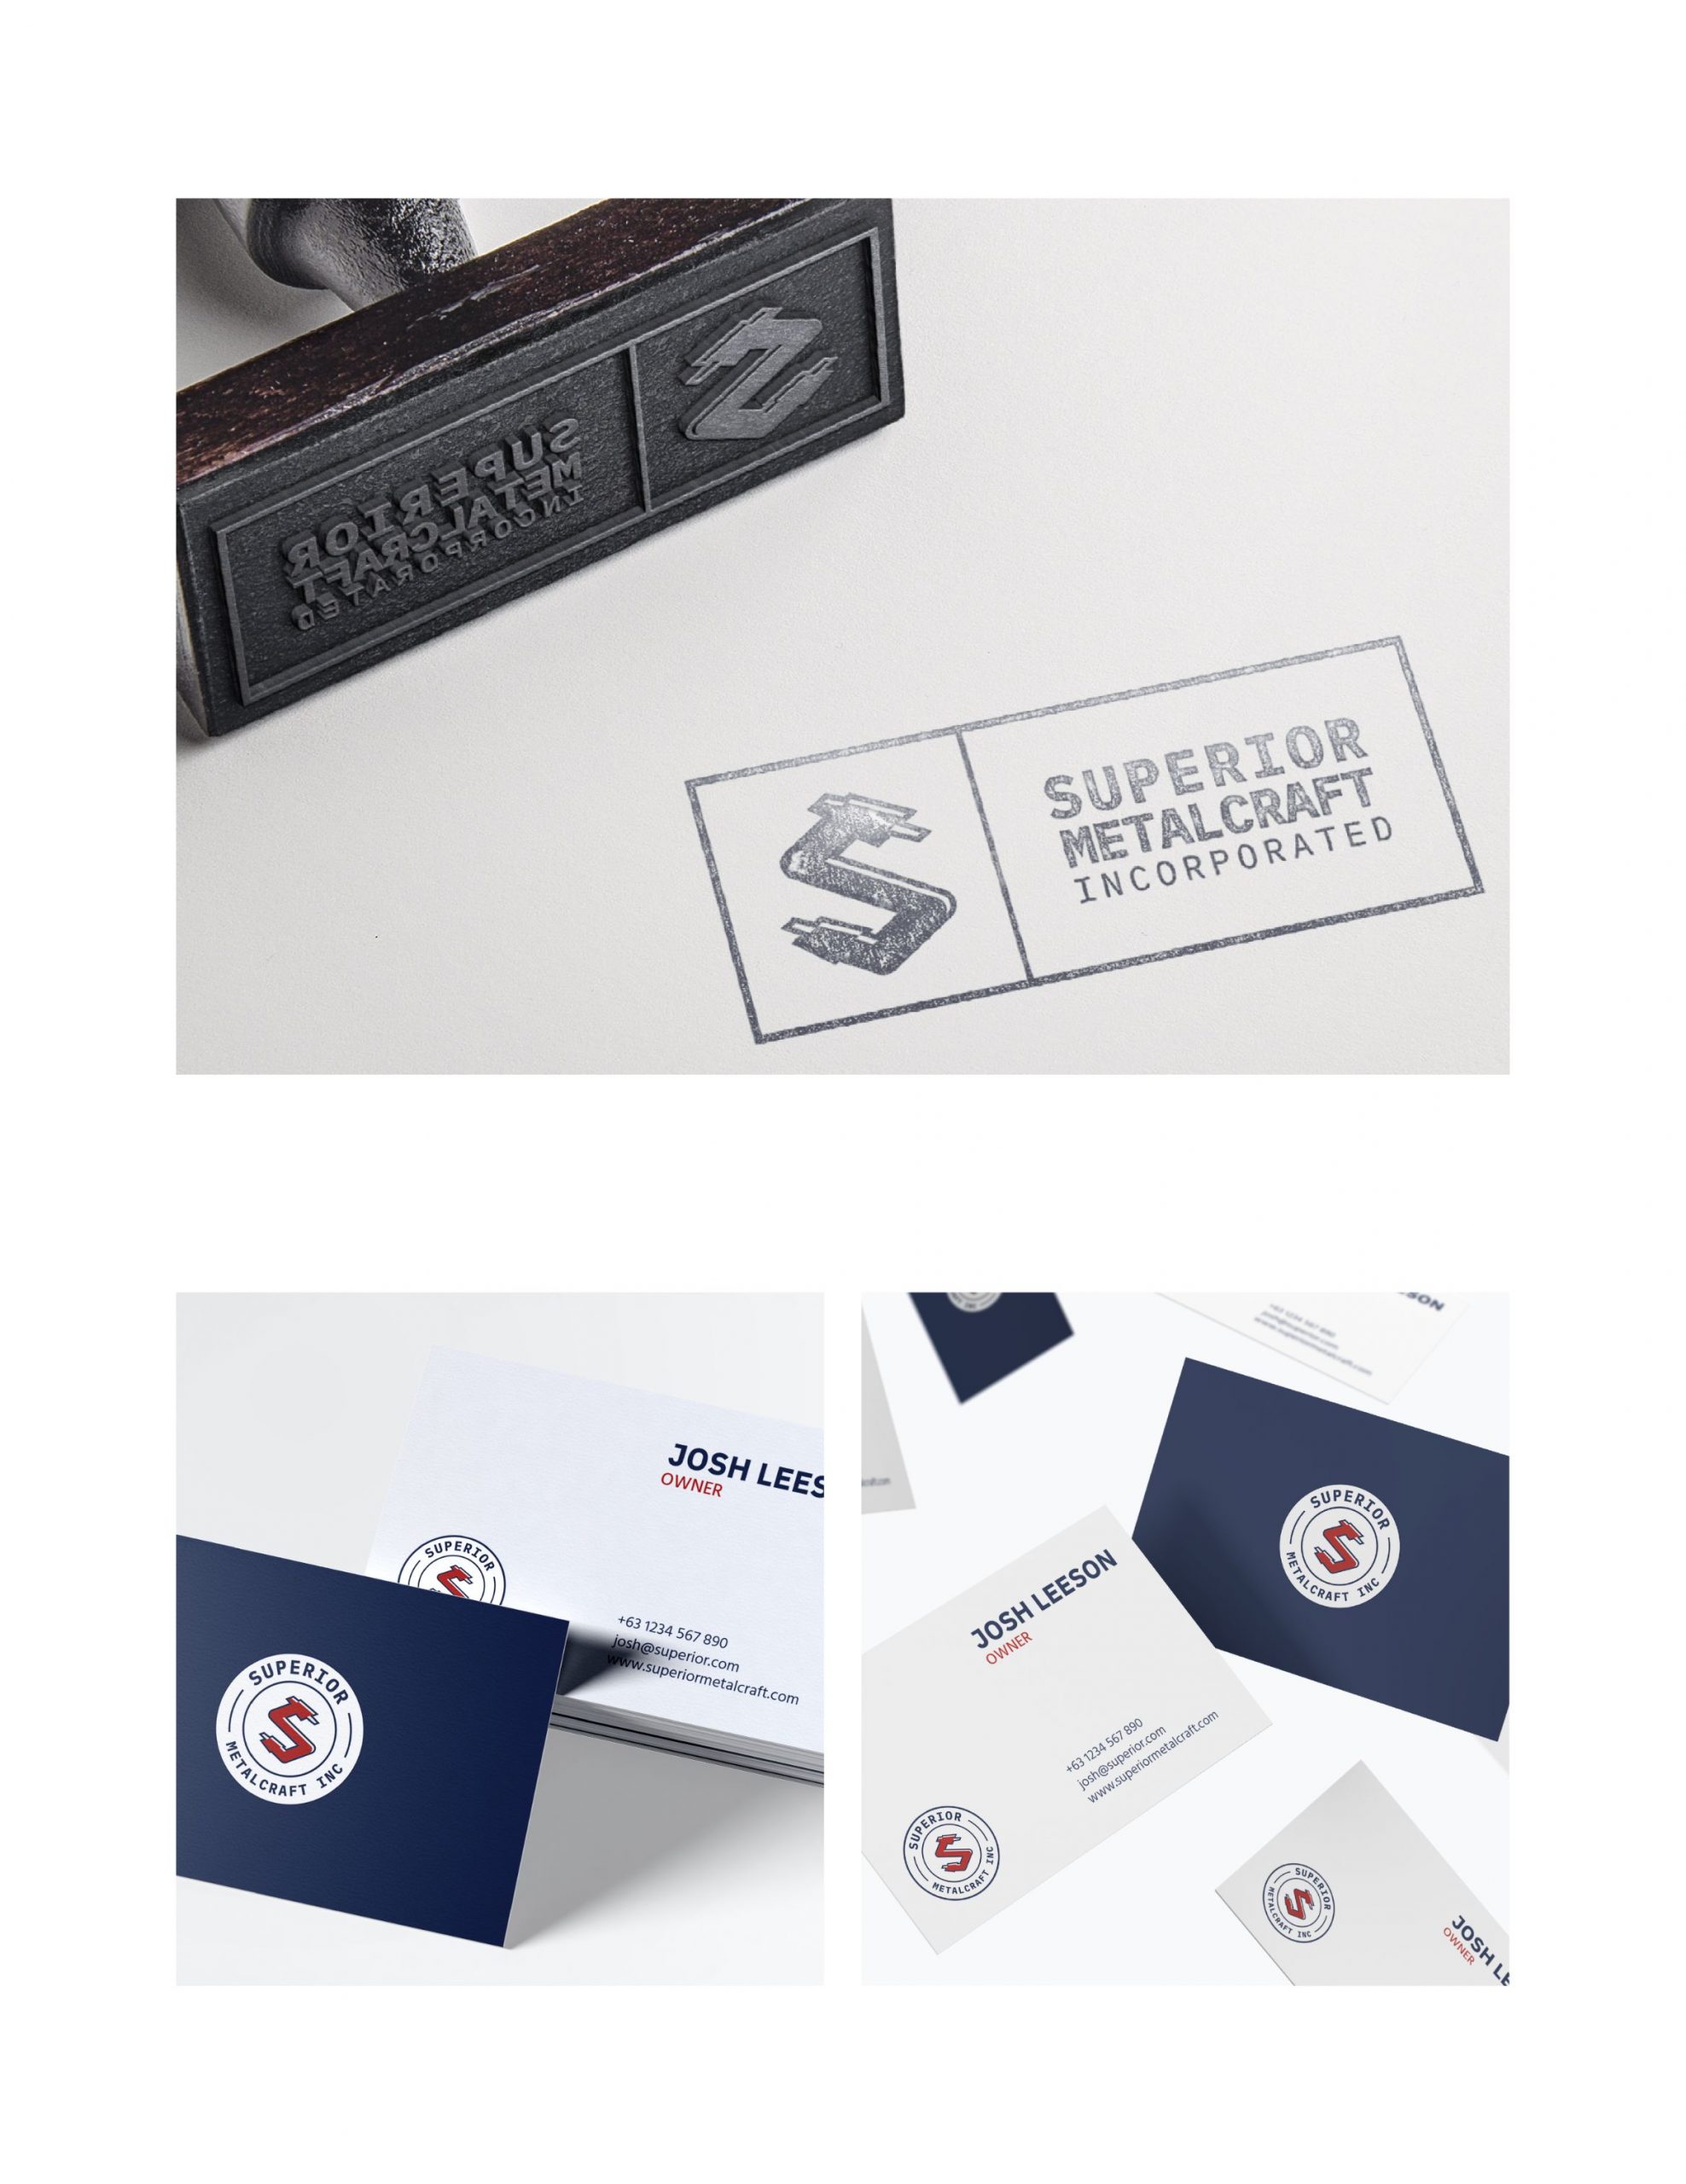 Images of the logo being used on paper stamp and calling card